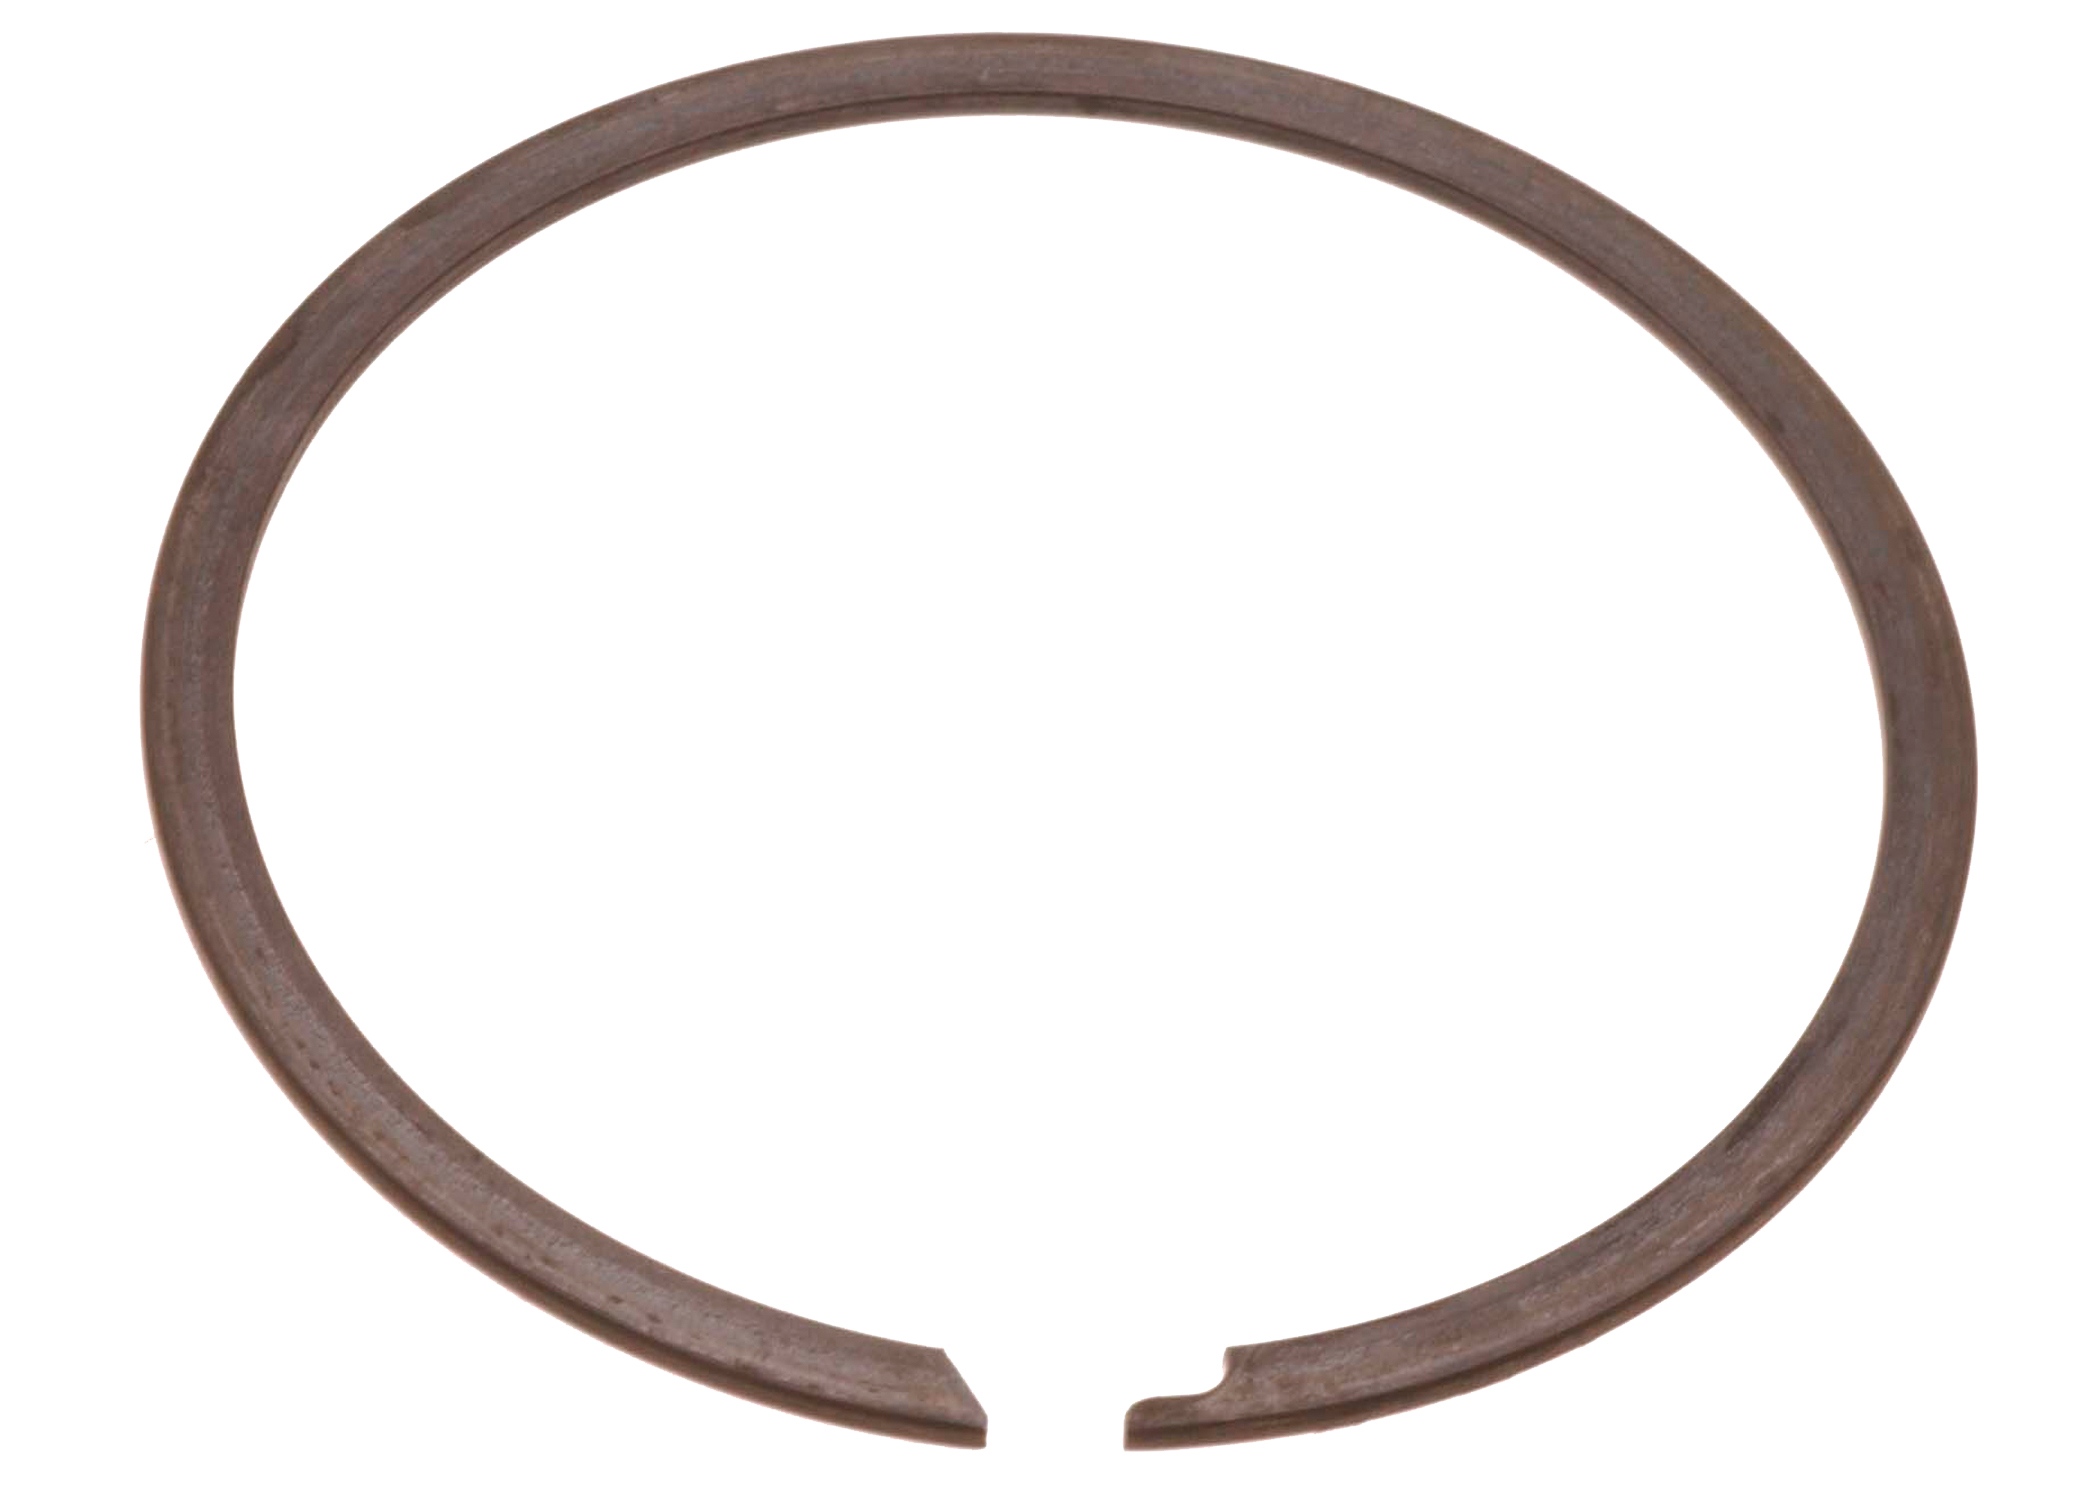 GM GENUINE PARTS - Automatic Transmission Clutch Spring Retaining Ring - GMP 24216149